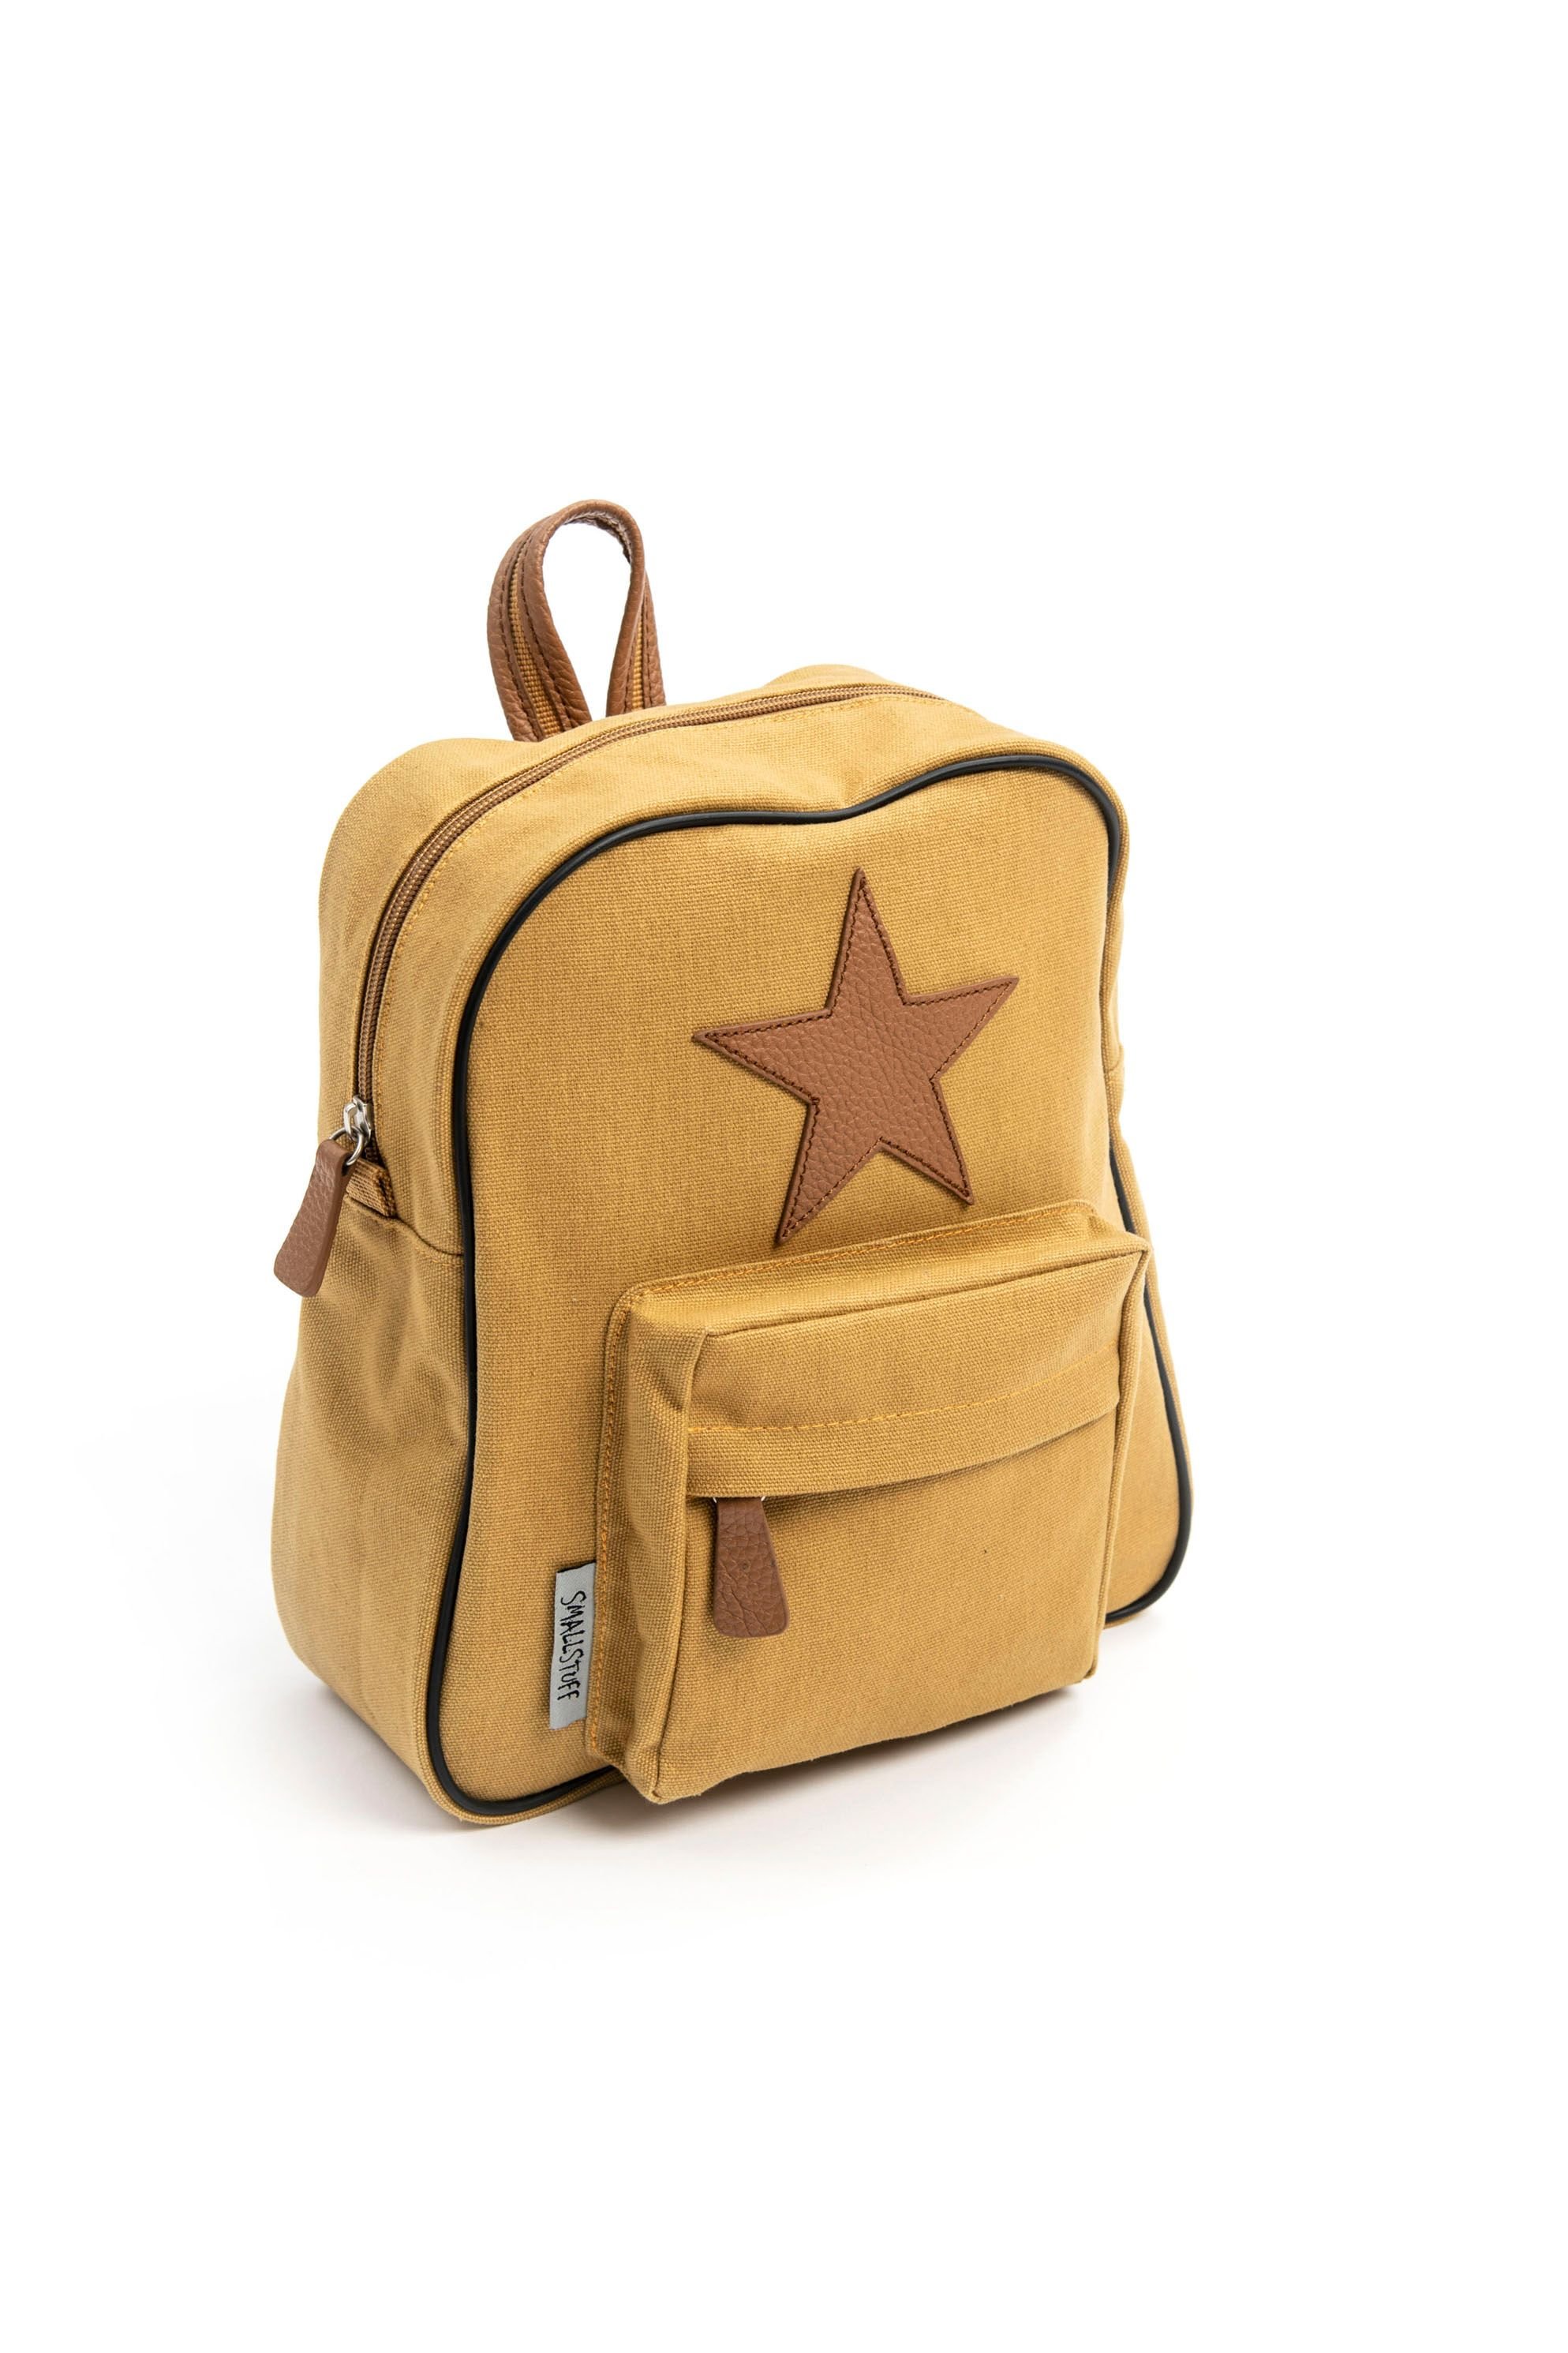 Smallstuff - Little Backpack w. Leather Star - Carry